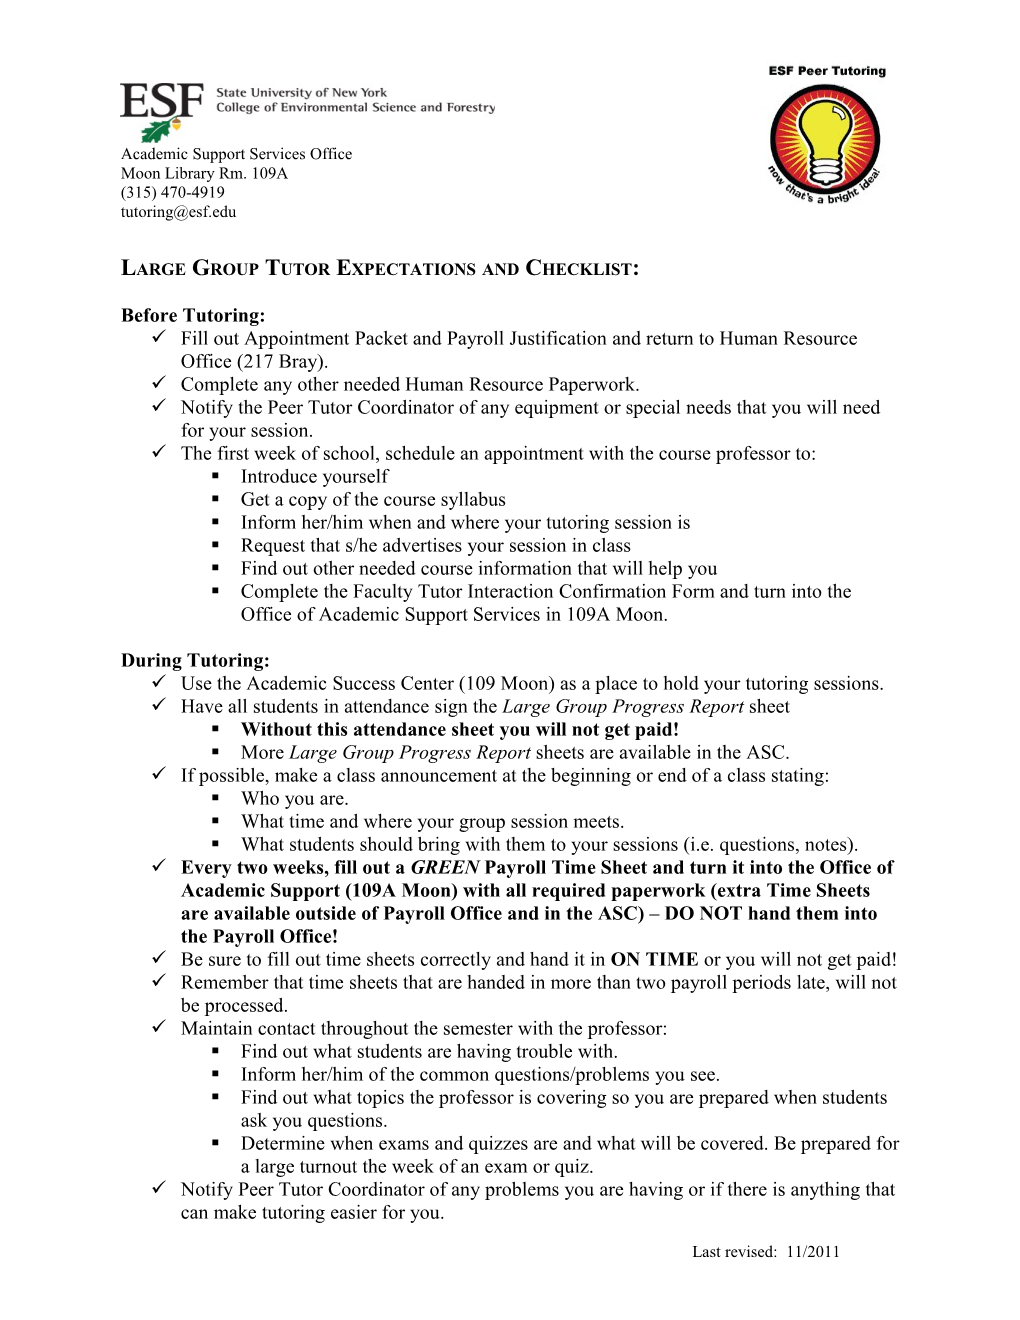 Large Group Tutor Expectations and Checklist